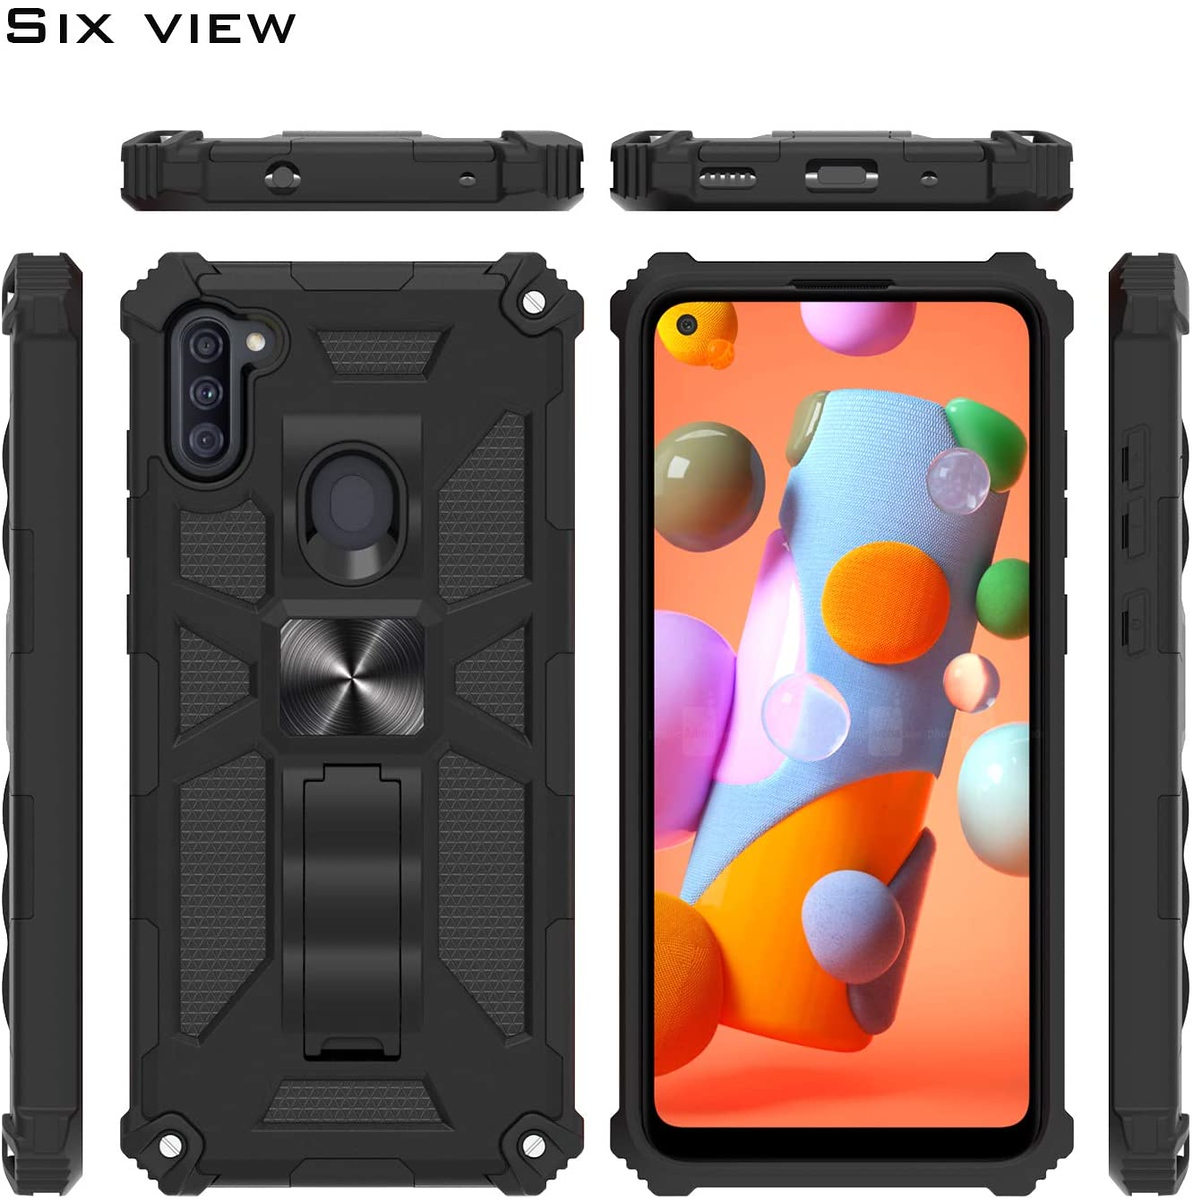 Xpression Case for Motorola Moto G Power 2021 with Invisible Kickstand Stand Dual Layer Hybrid Defender Military Grade Shockproof Hard TPU Phone Cover [Black] - image 4 of 8